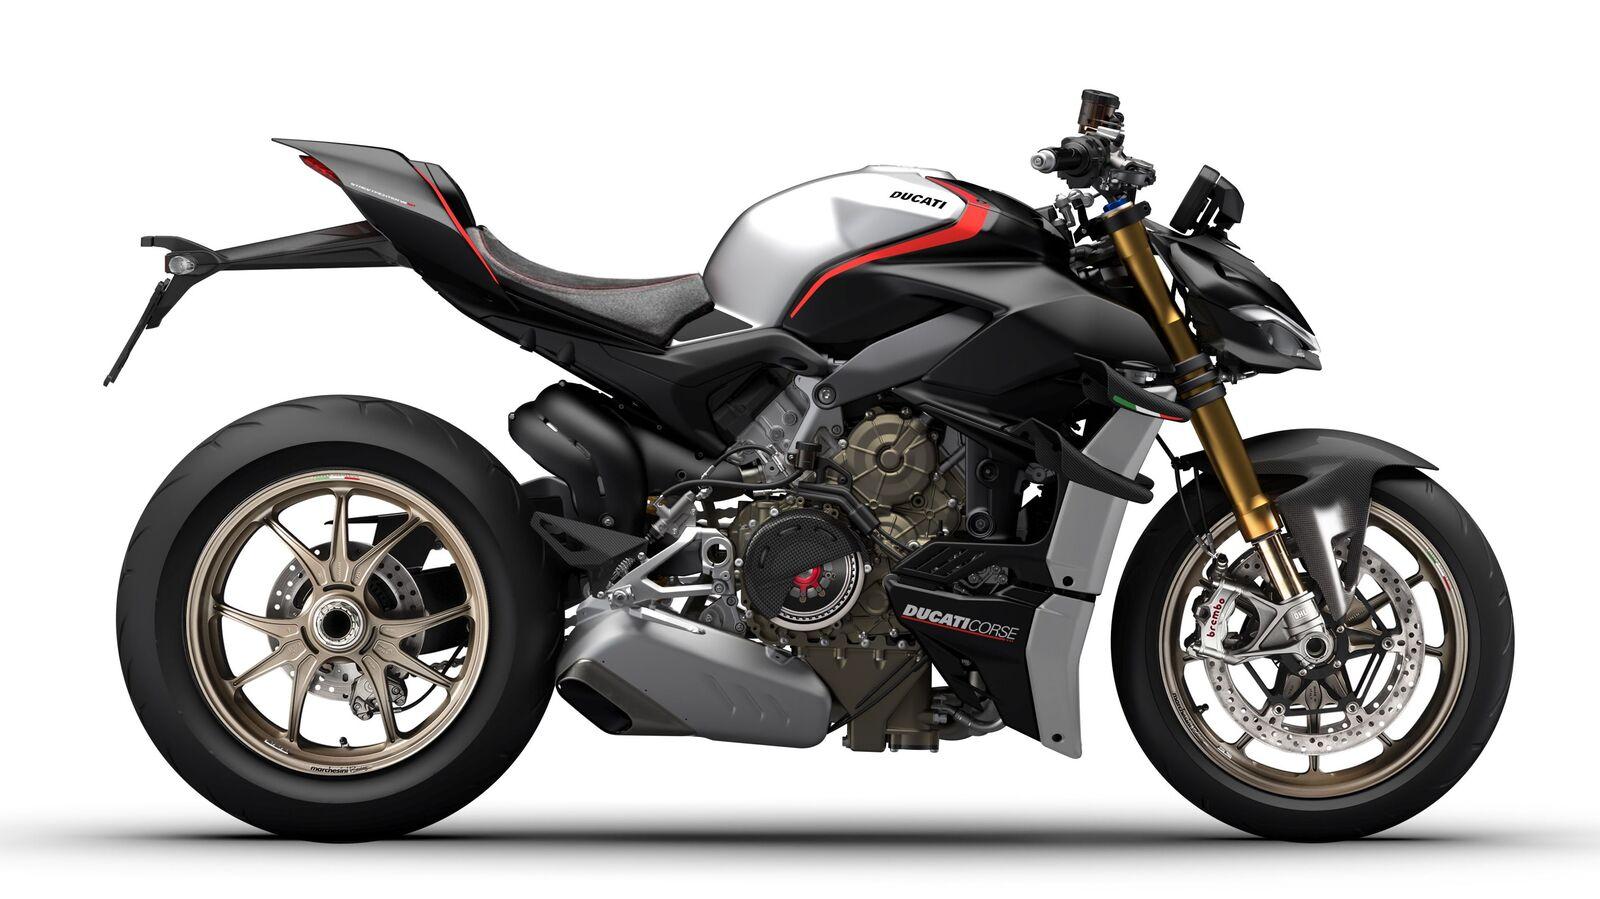 Ducati Streetfighter V4 Spsport Naked Bike Launched At